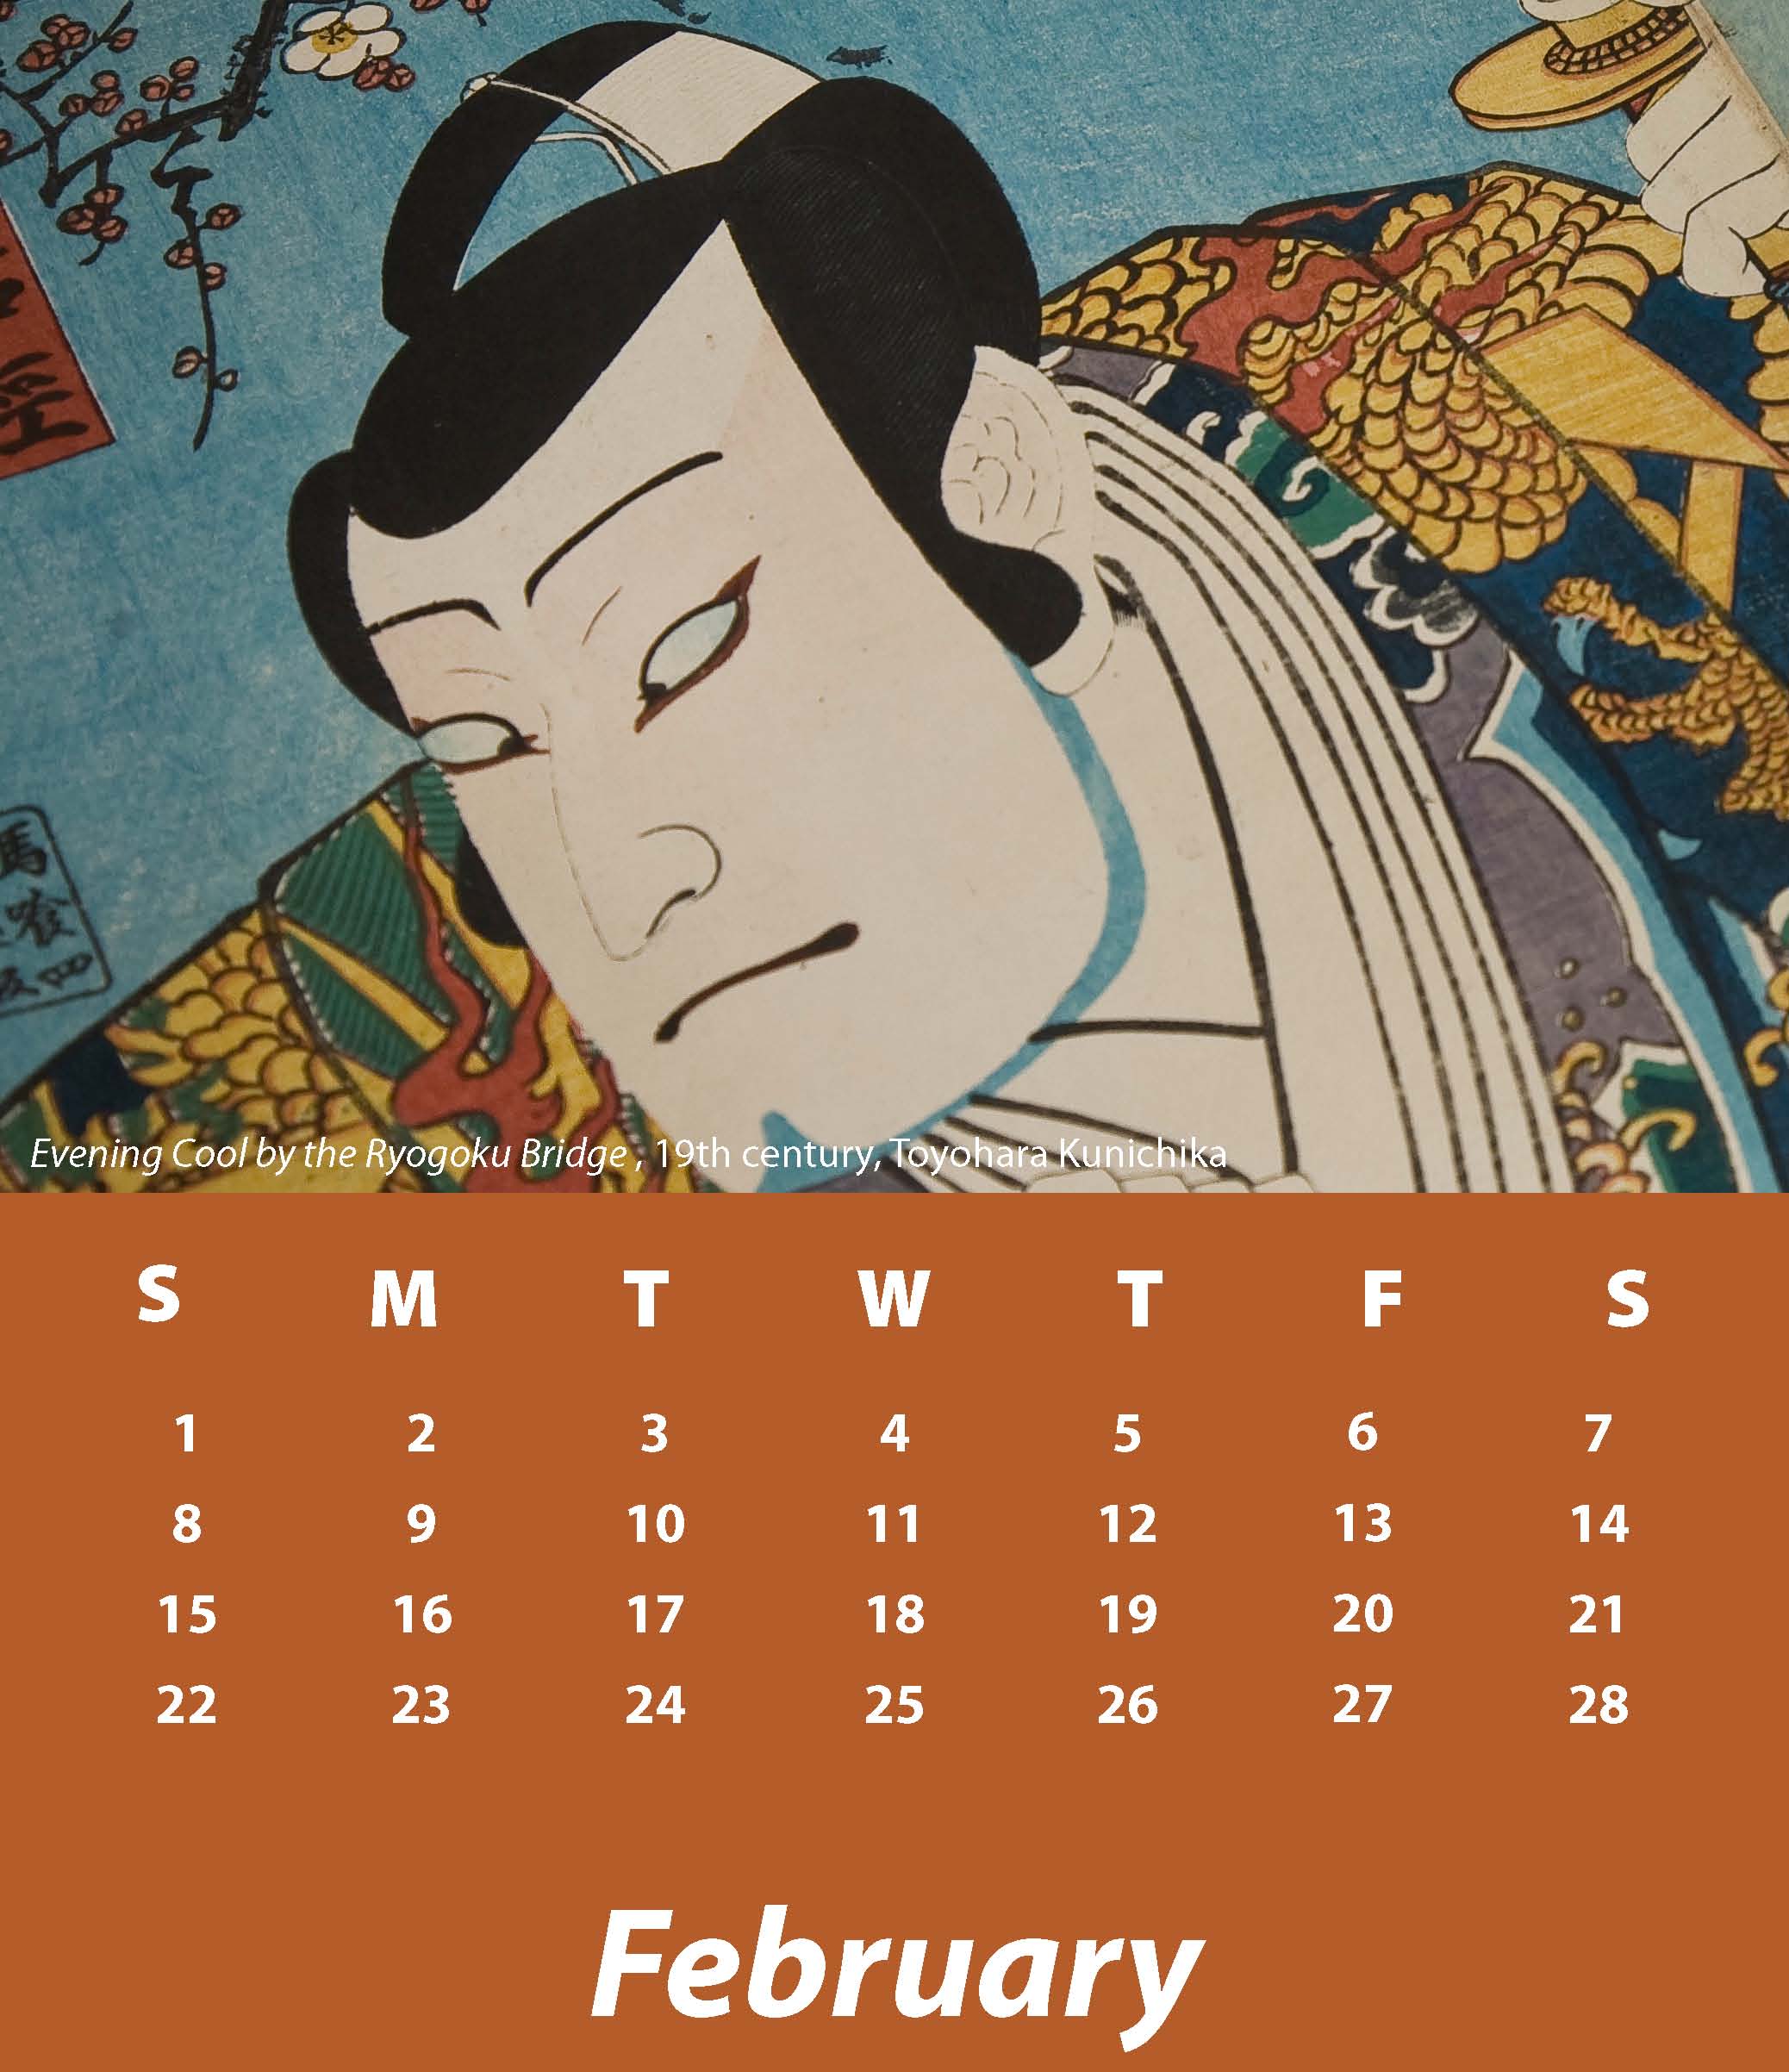 a February calendar in orange with the image Evening Cool by the Ryogoku Bridge